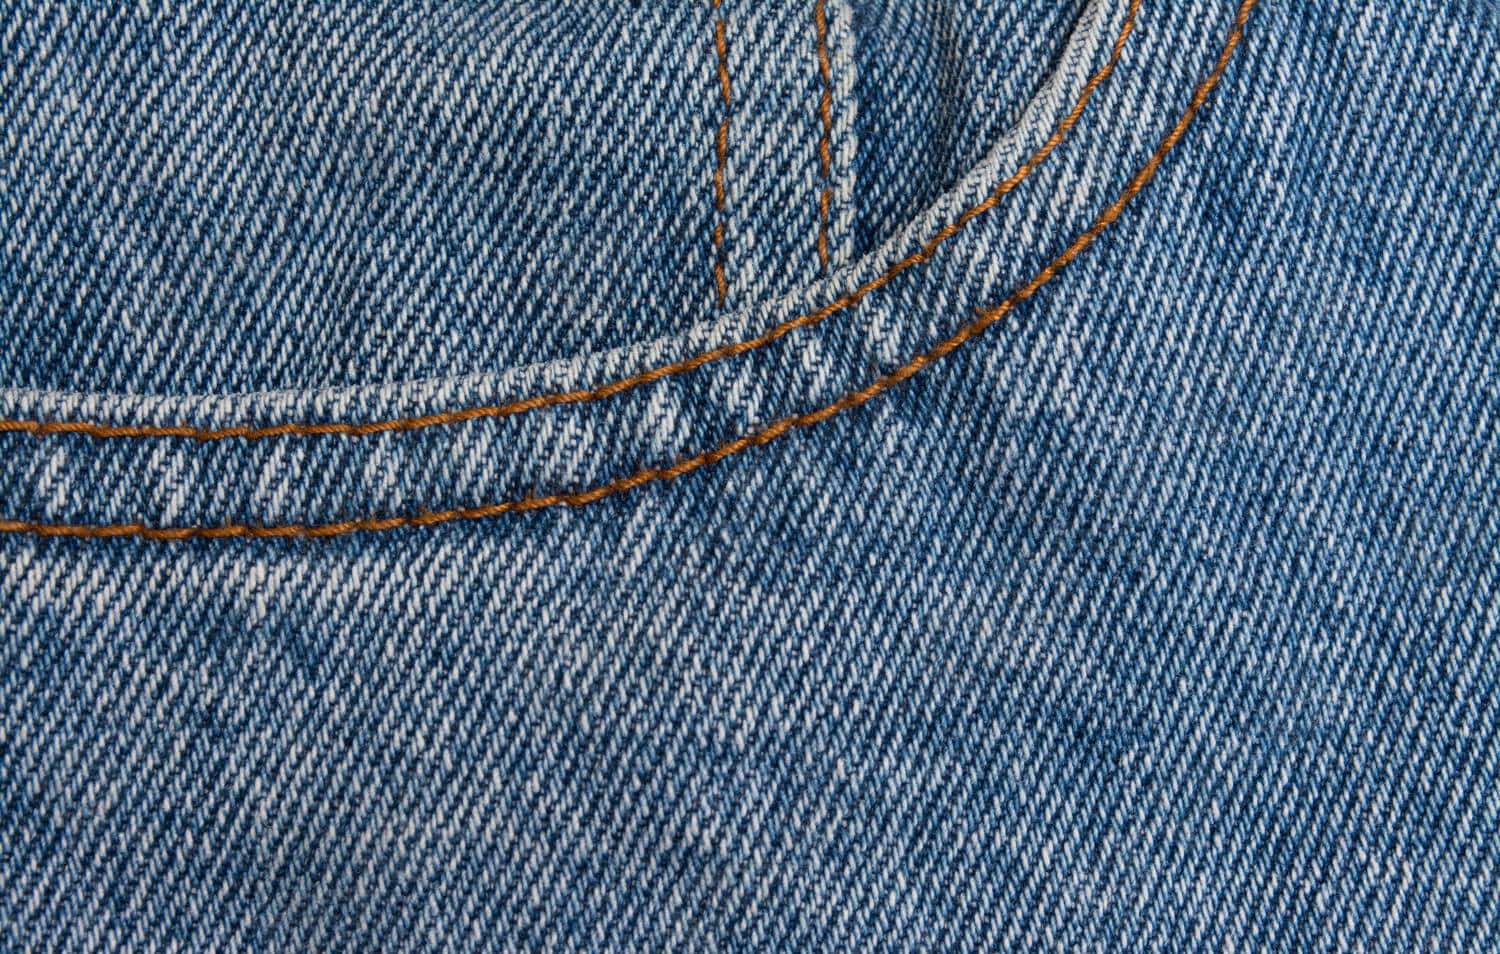 Denim is the ideal material for any fashion statement.